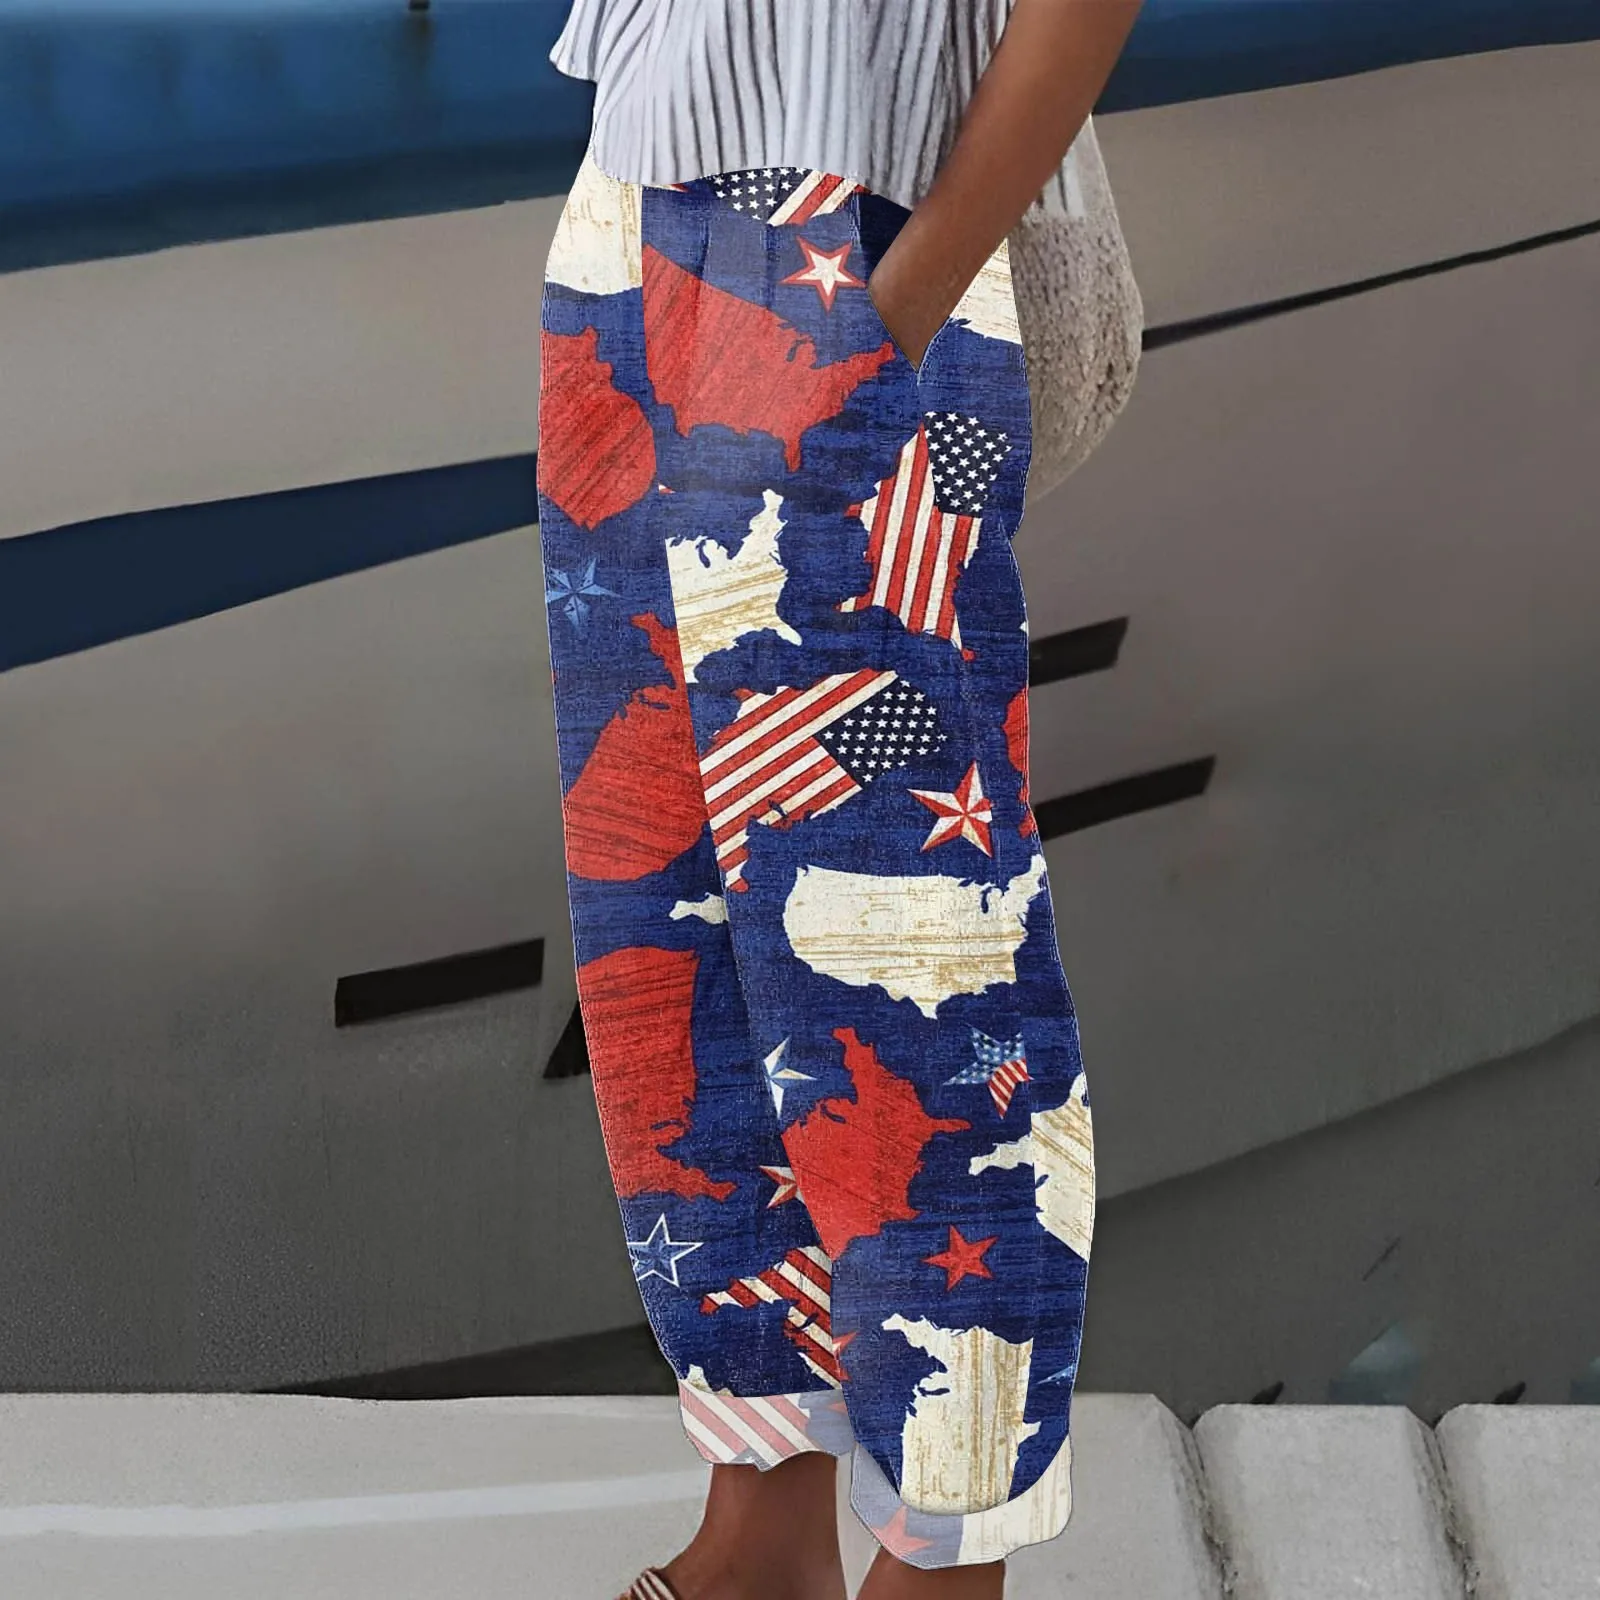 

Women's Casual Independence Day American Flag Prints Pants Baggy Elastic Pants For Women Pocket Pants All-Math Plain